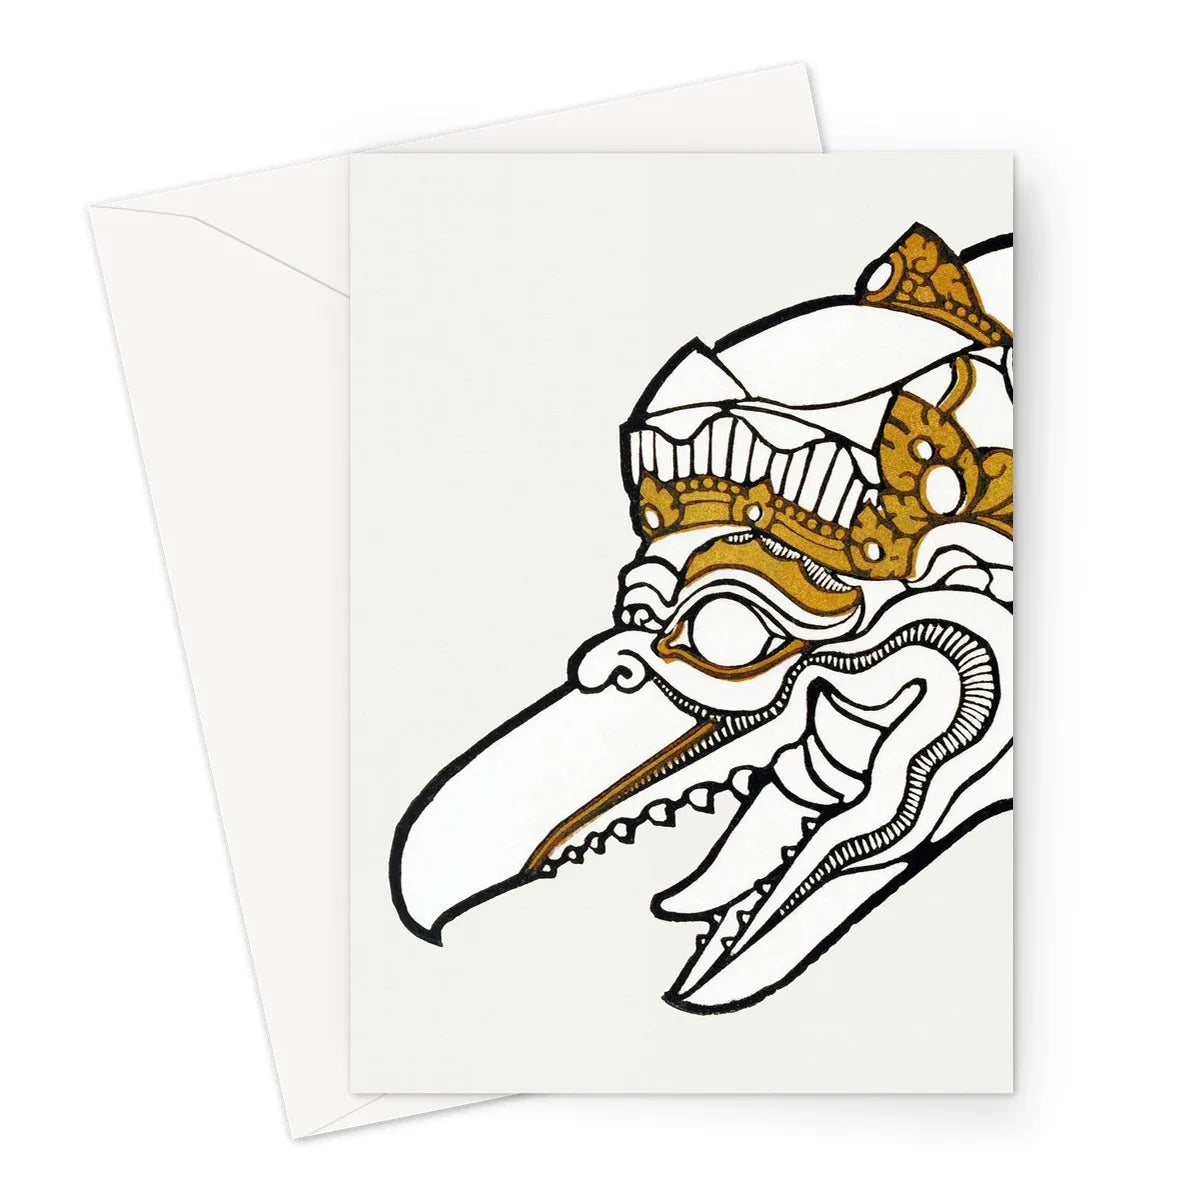 Head Of Garuda - Reijer Stolk Graphic Art Greeting Card - A5 Portrait / 1 Card - Greeting & Note Cards - Aesthetic Art